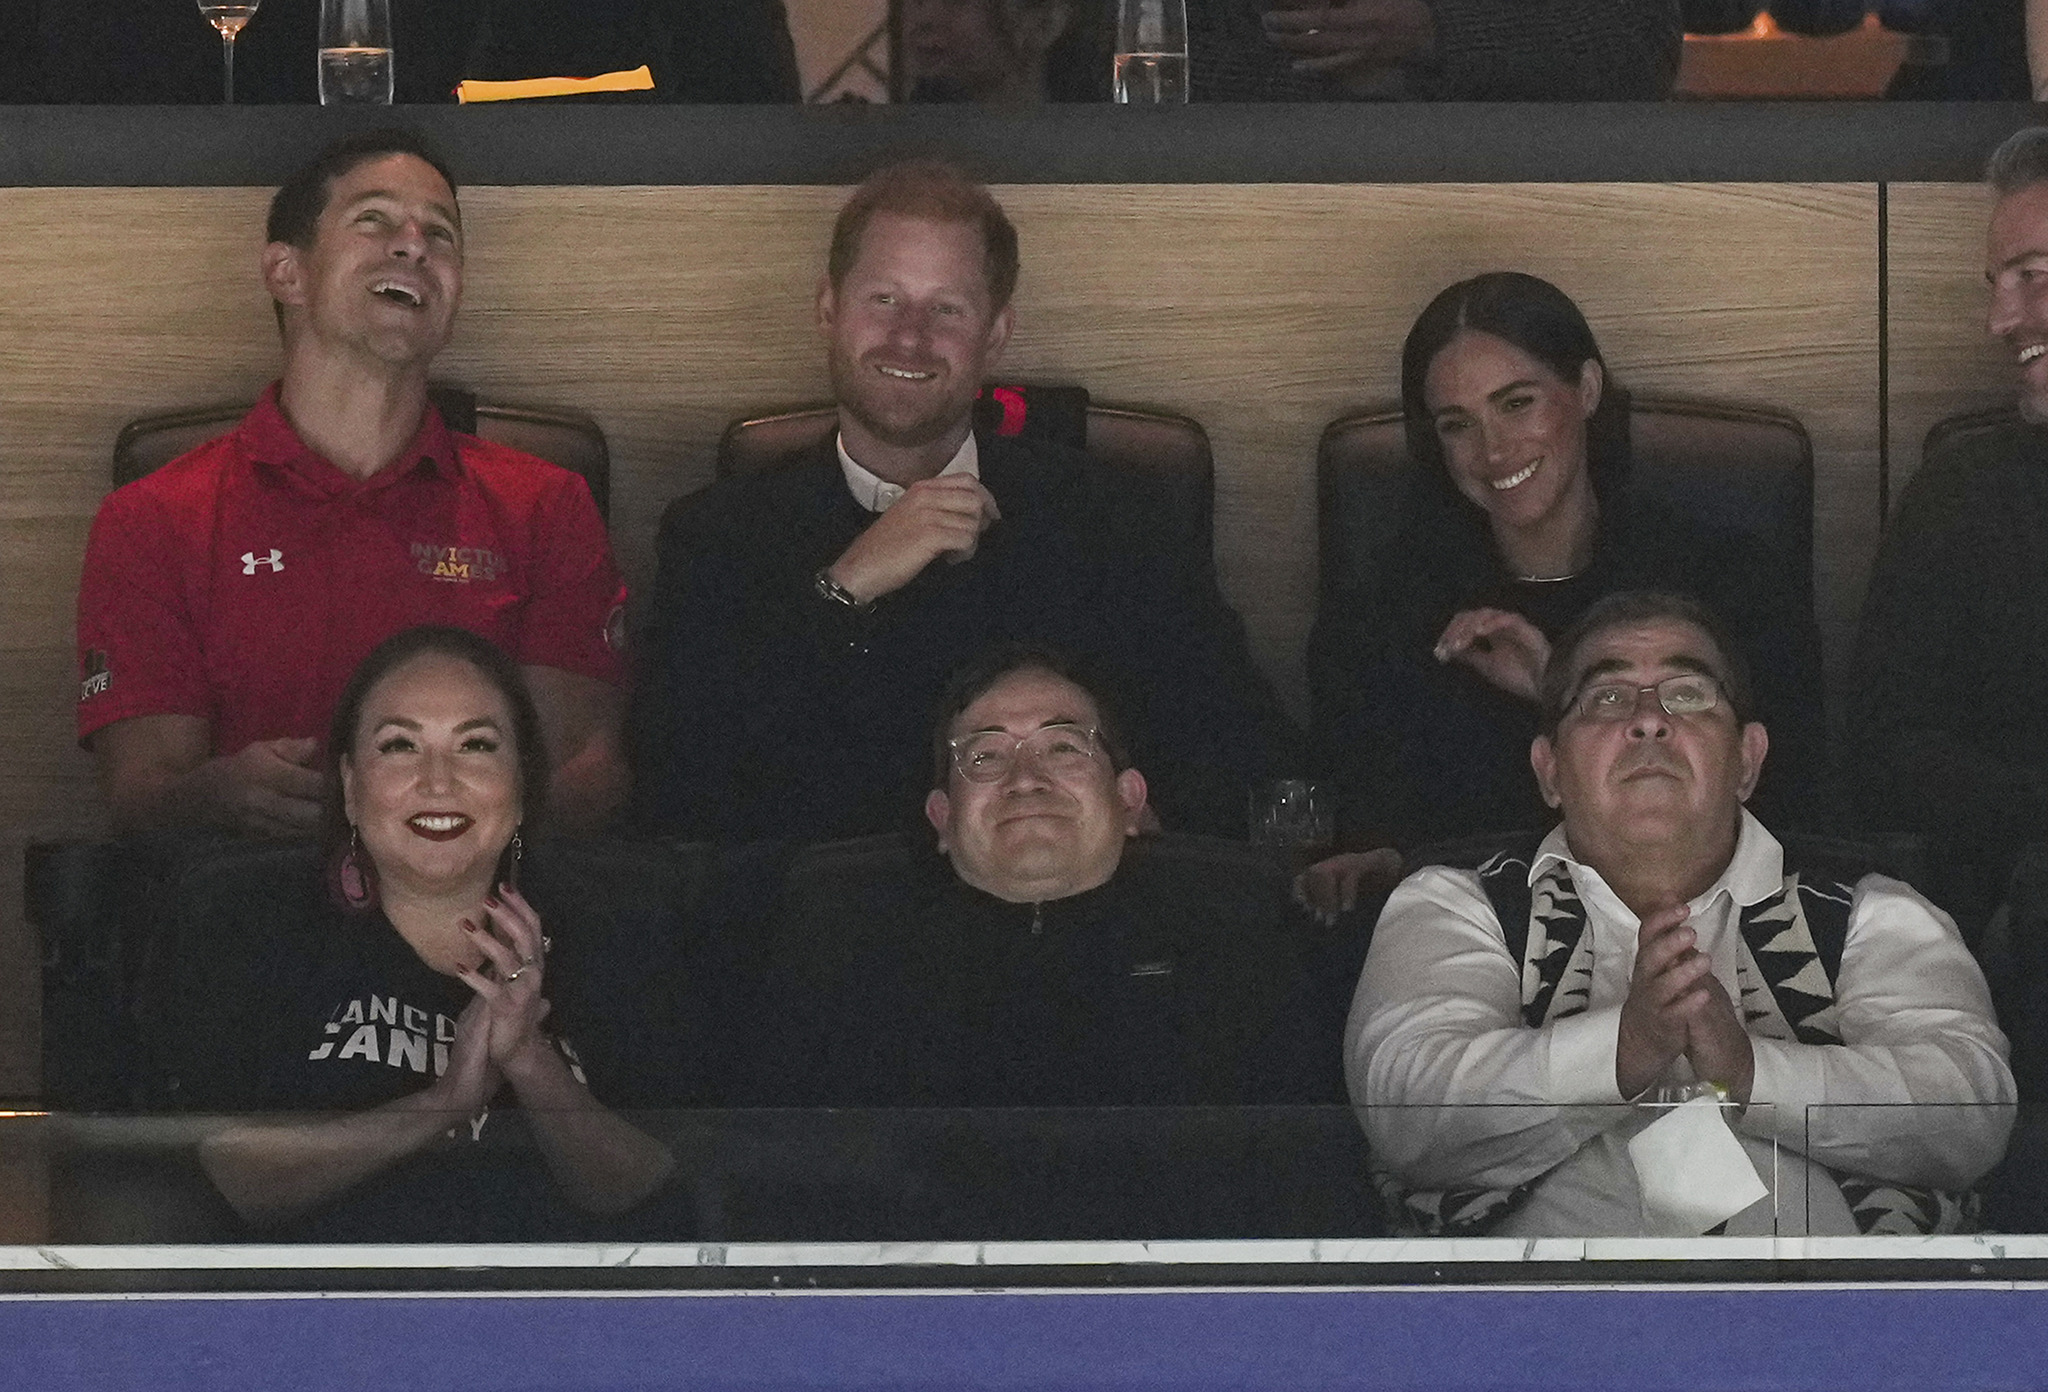 Prince Harry, top second from left, and Meghan Markle, top right, watch the Vancouver Canucks and San Jose Sharks